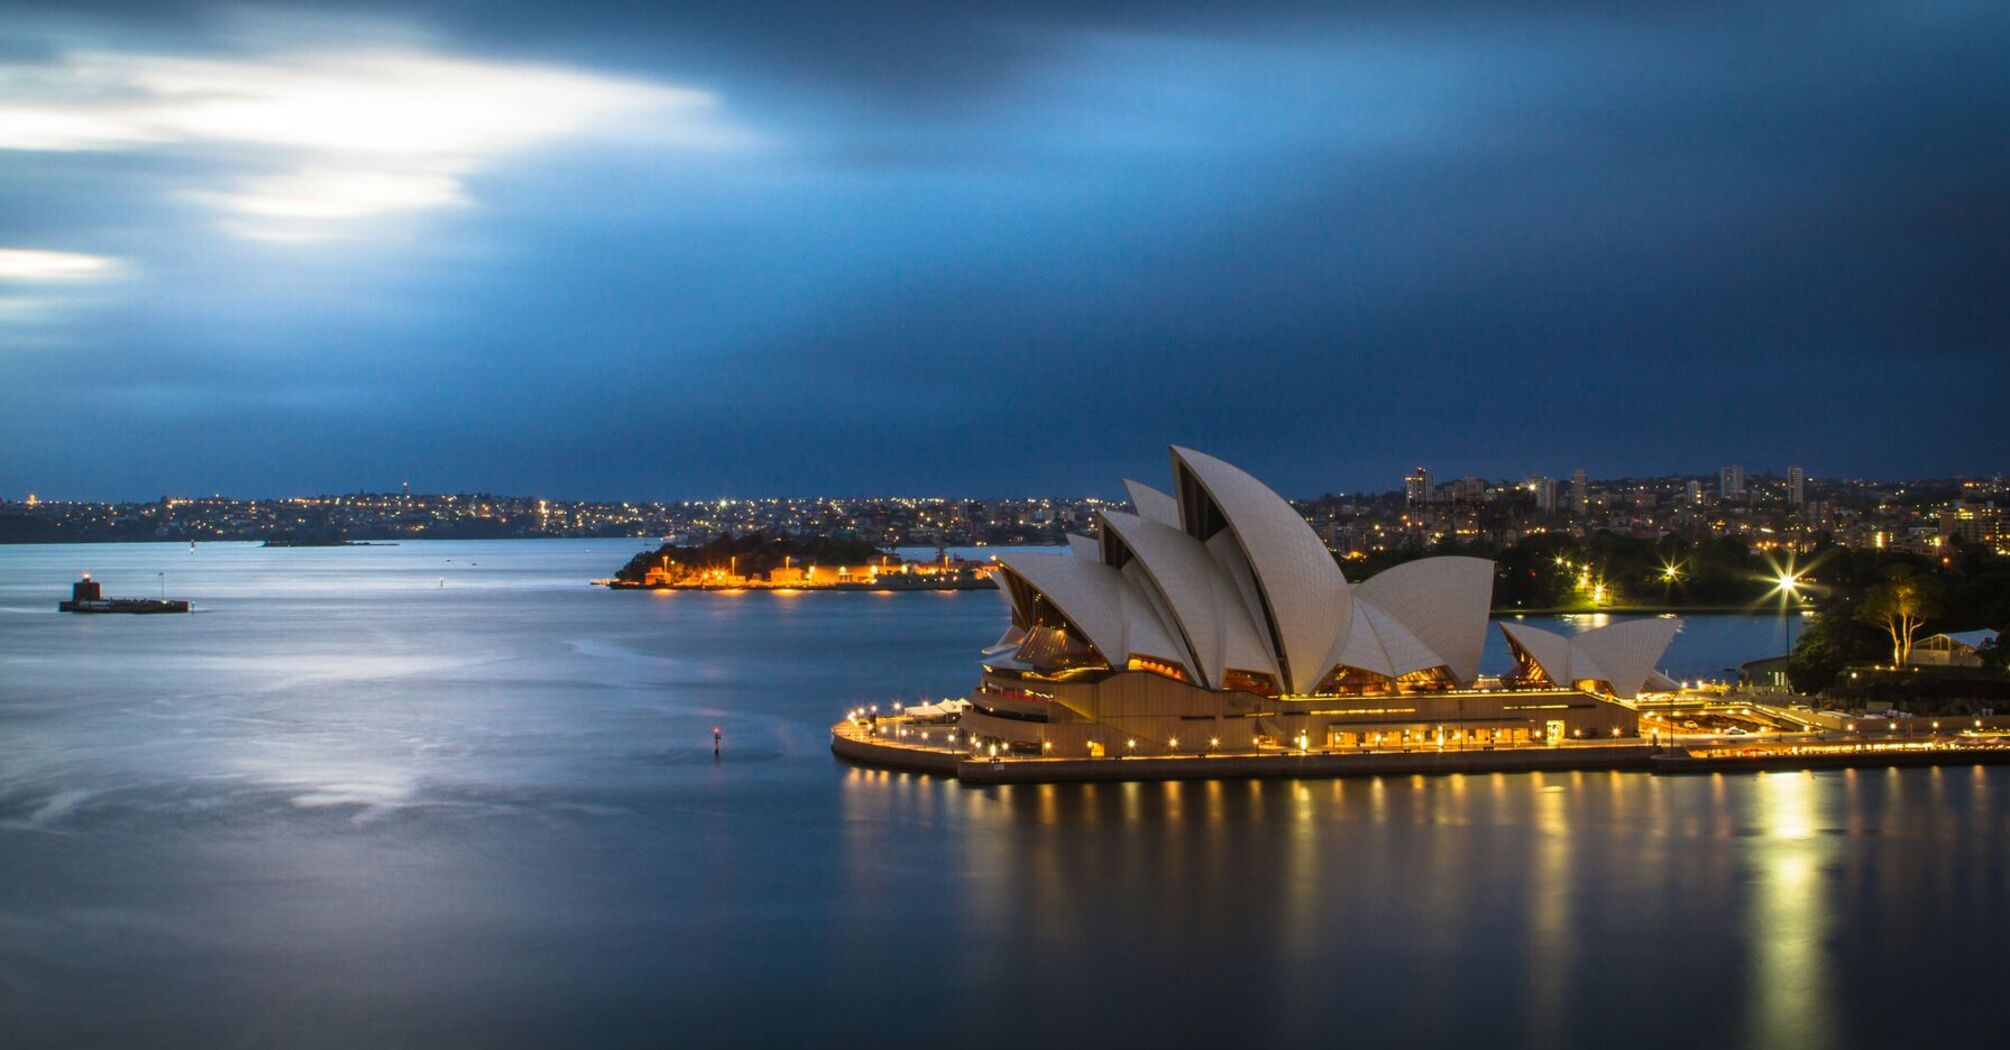 Evening view of the Sydney Opera House